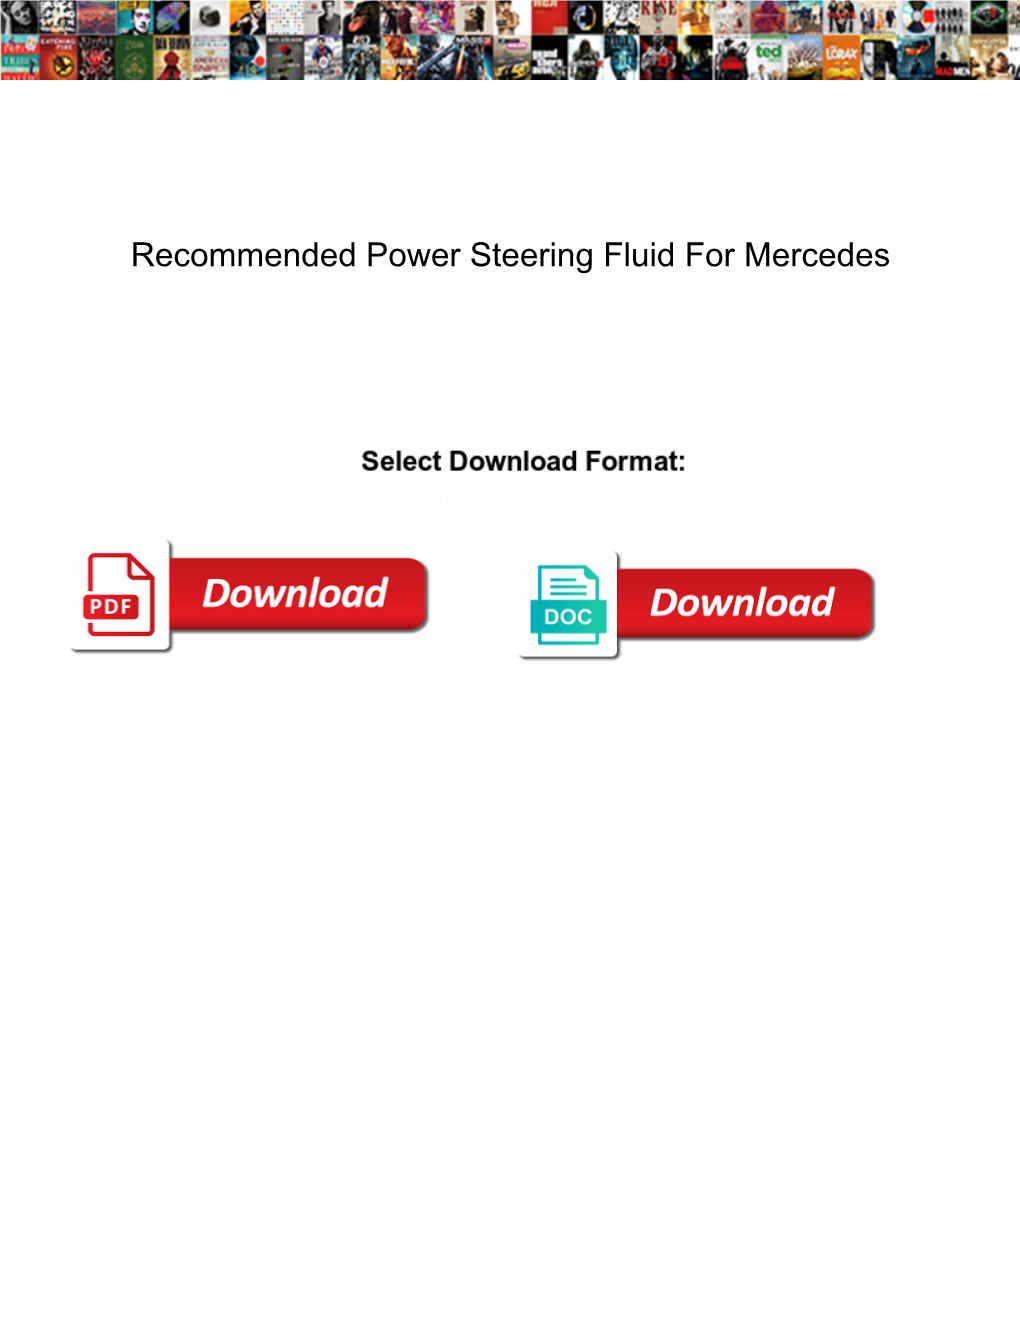 Recommended Power Steering Fluid for Mercedes